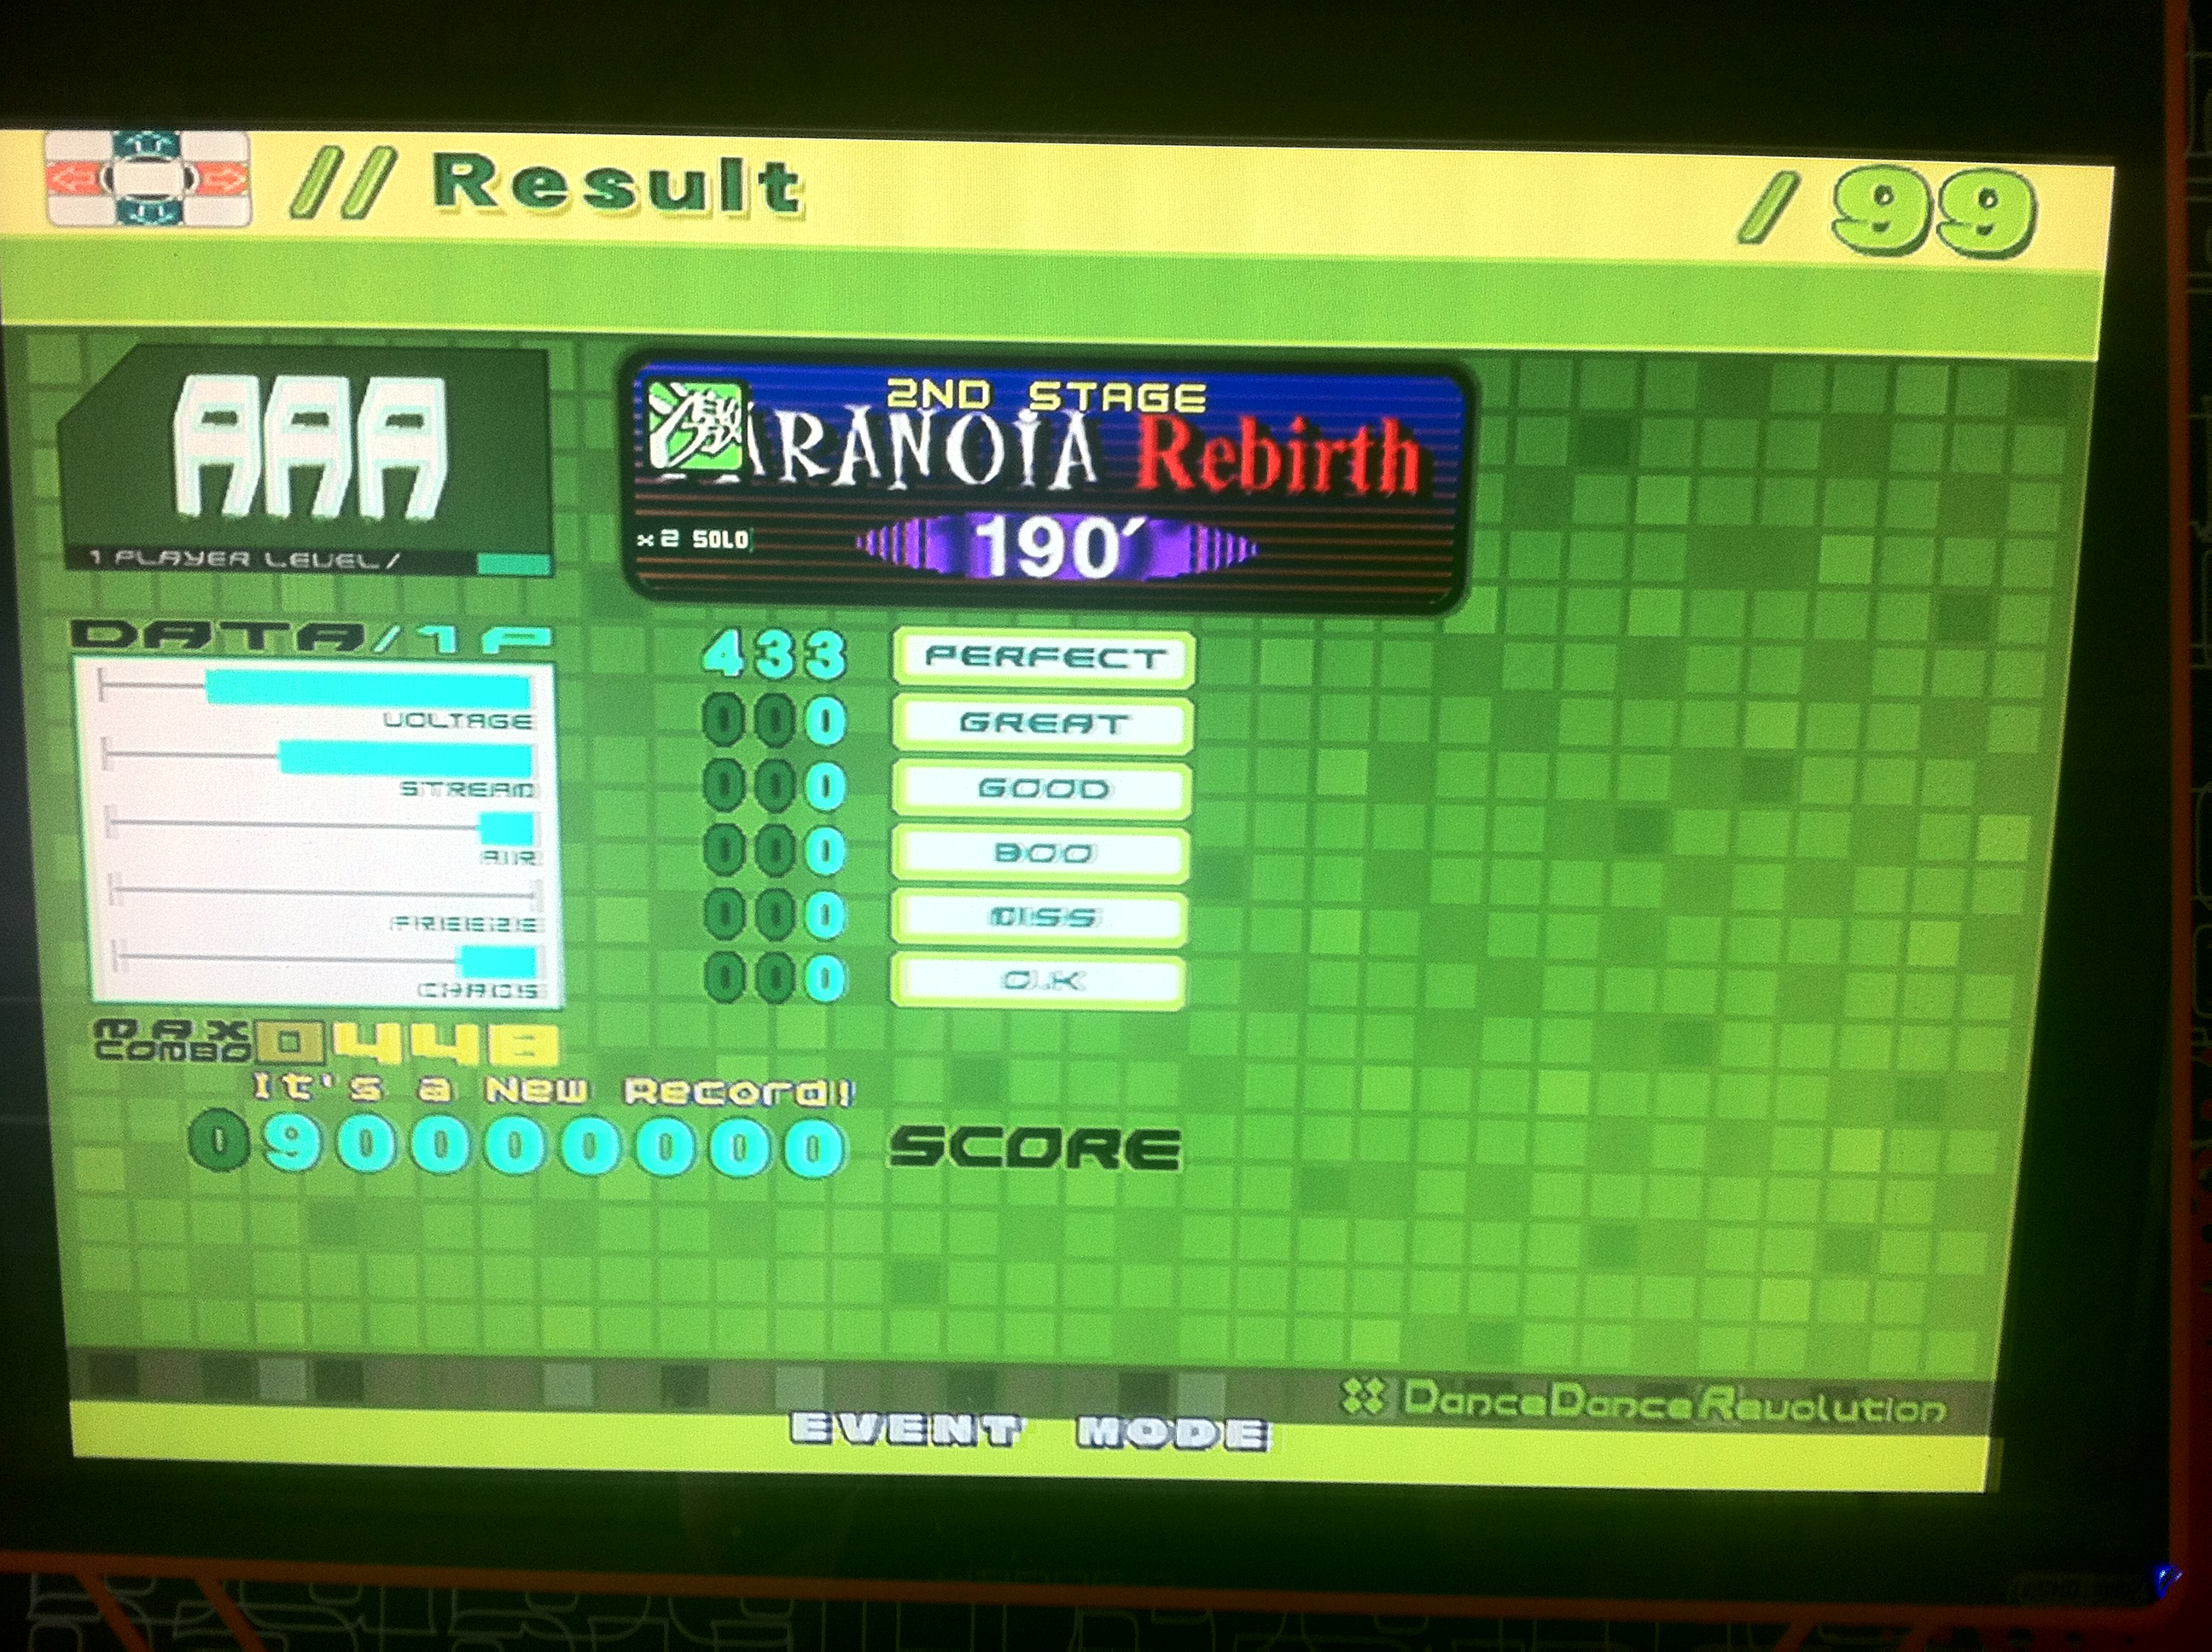 Kon - PARANOiA Rebrith (Heavy) AAA on DDR EXTREME (Japan)